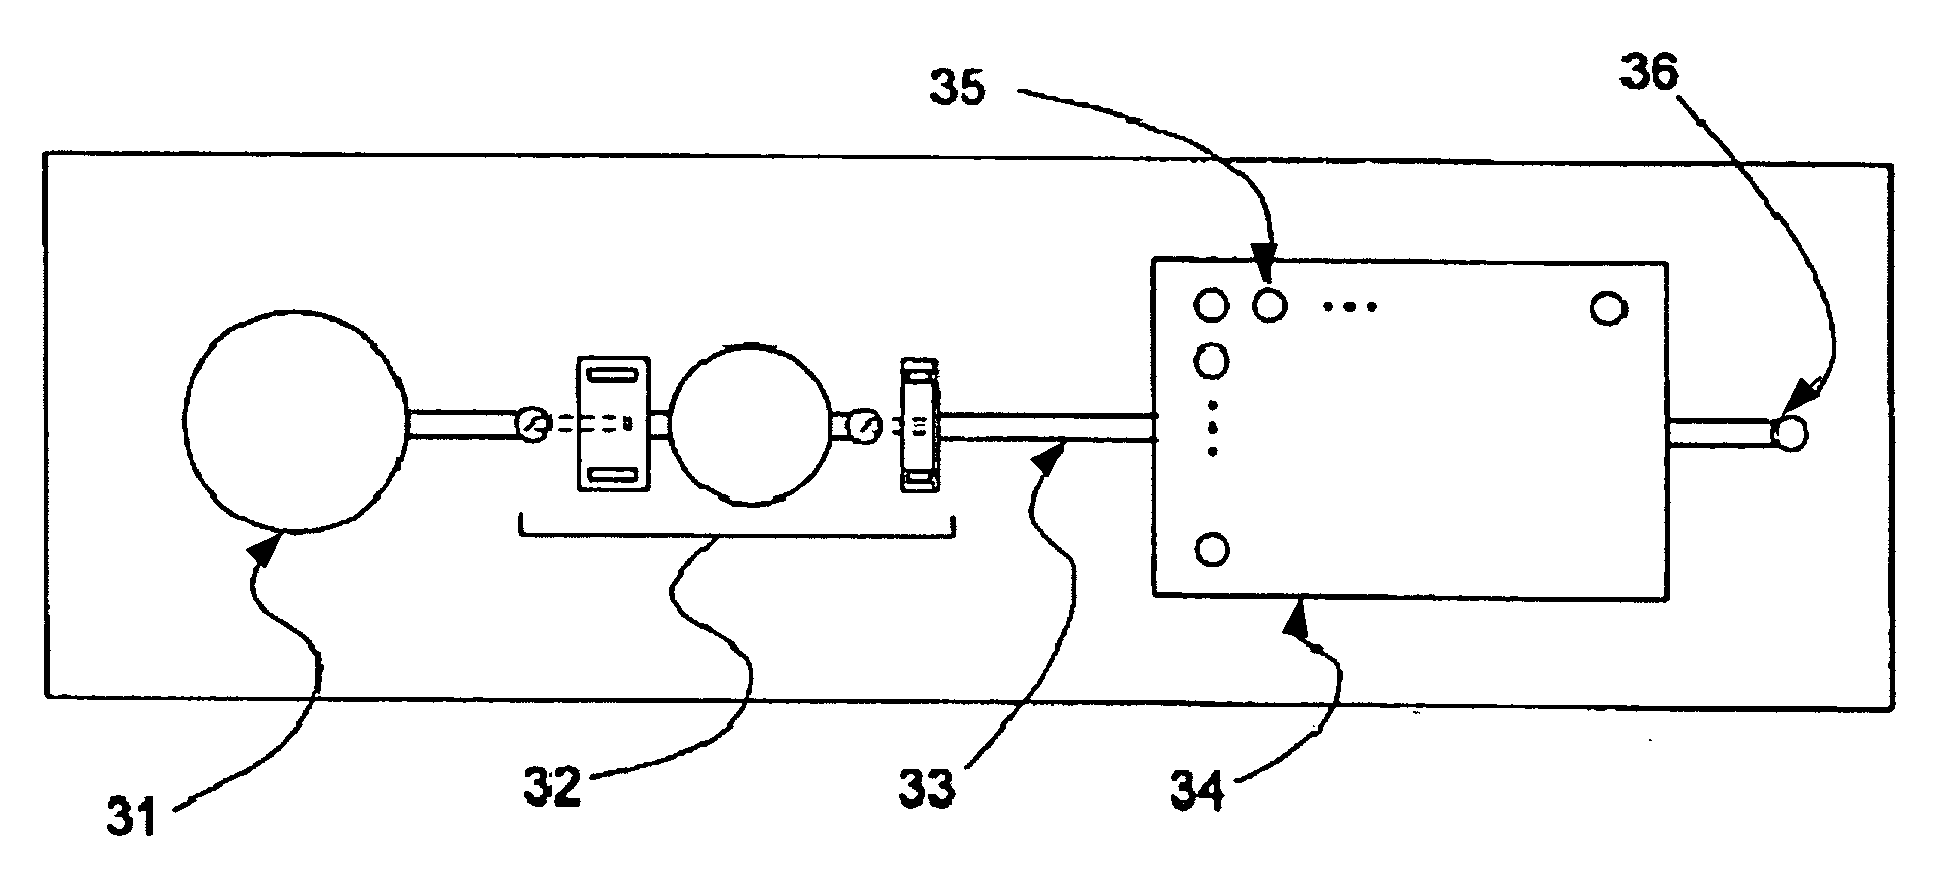 Miniaturized fluid delivery and analysis system